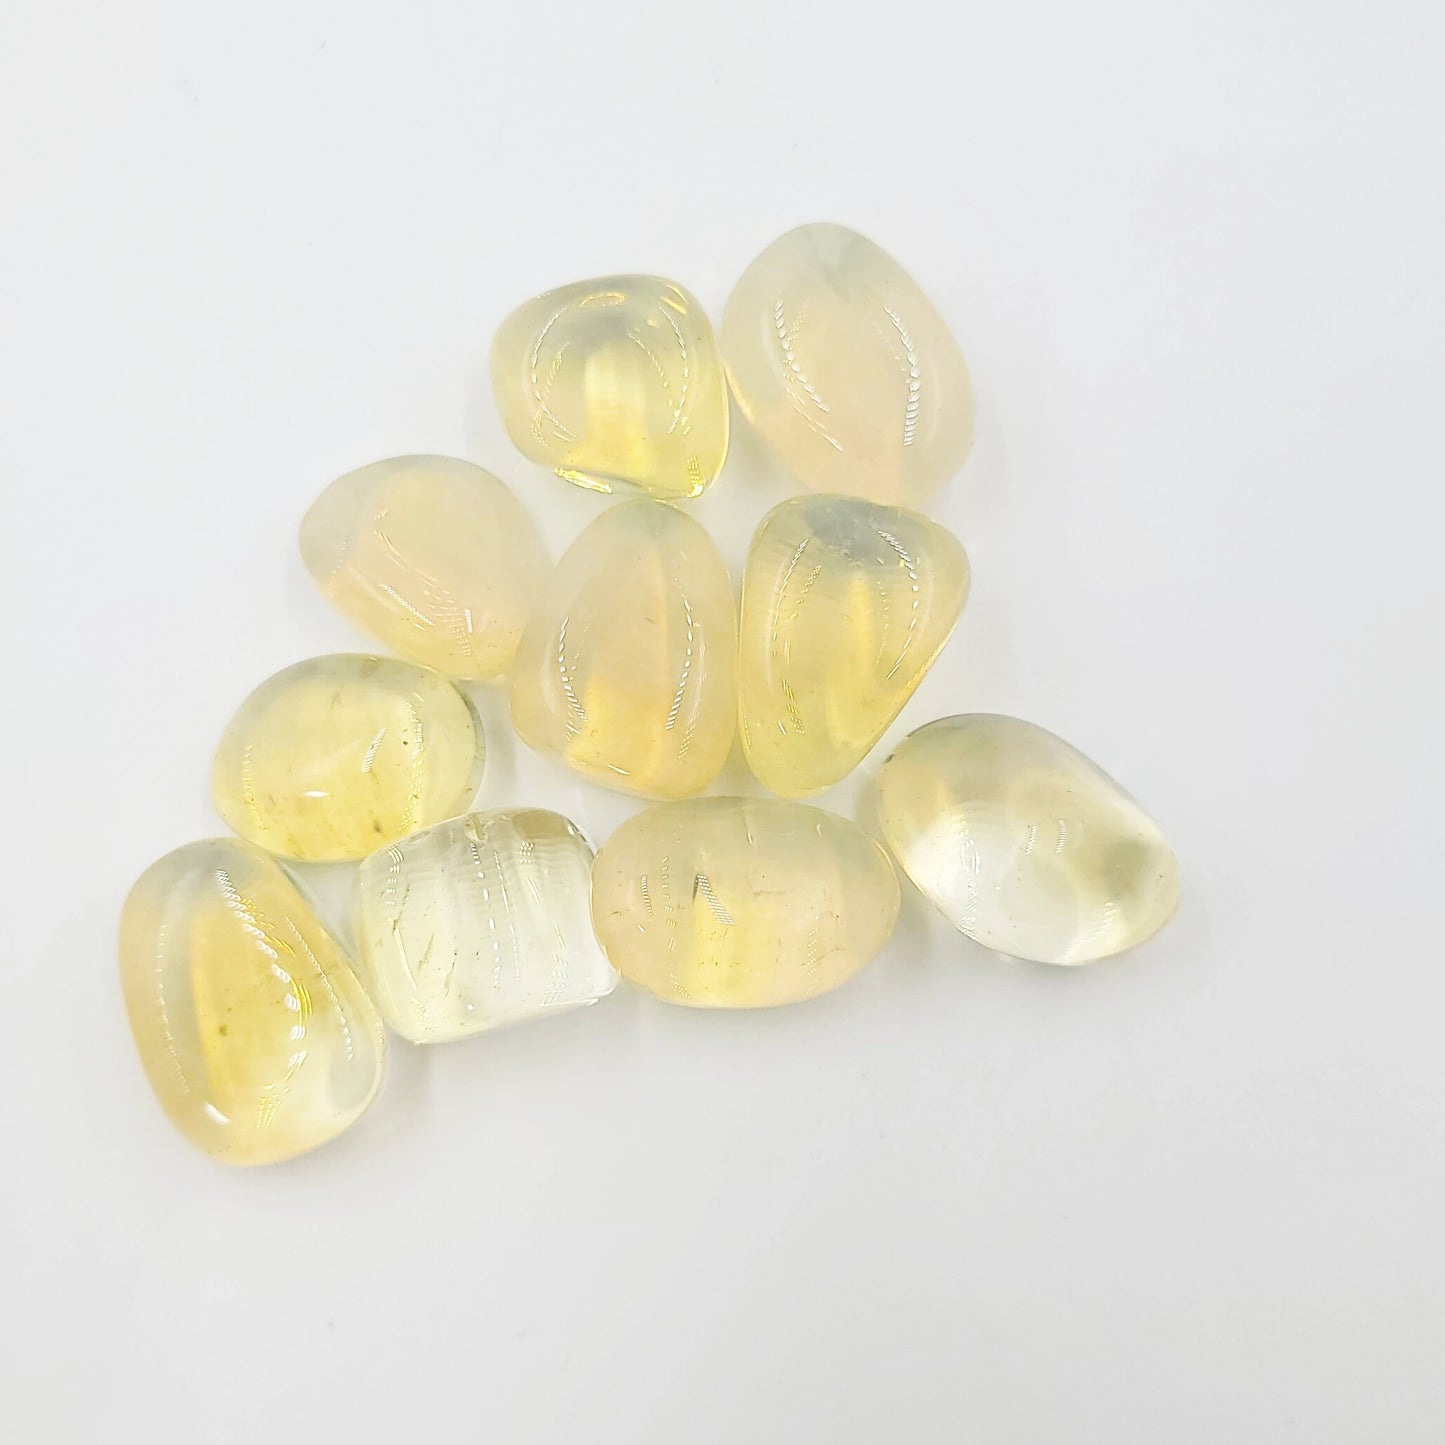 Yellow Opalite Tumbled - Elevated Metaphysical